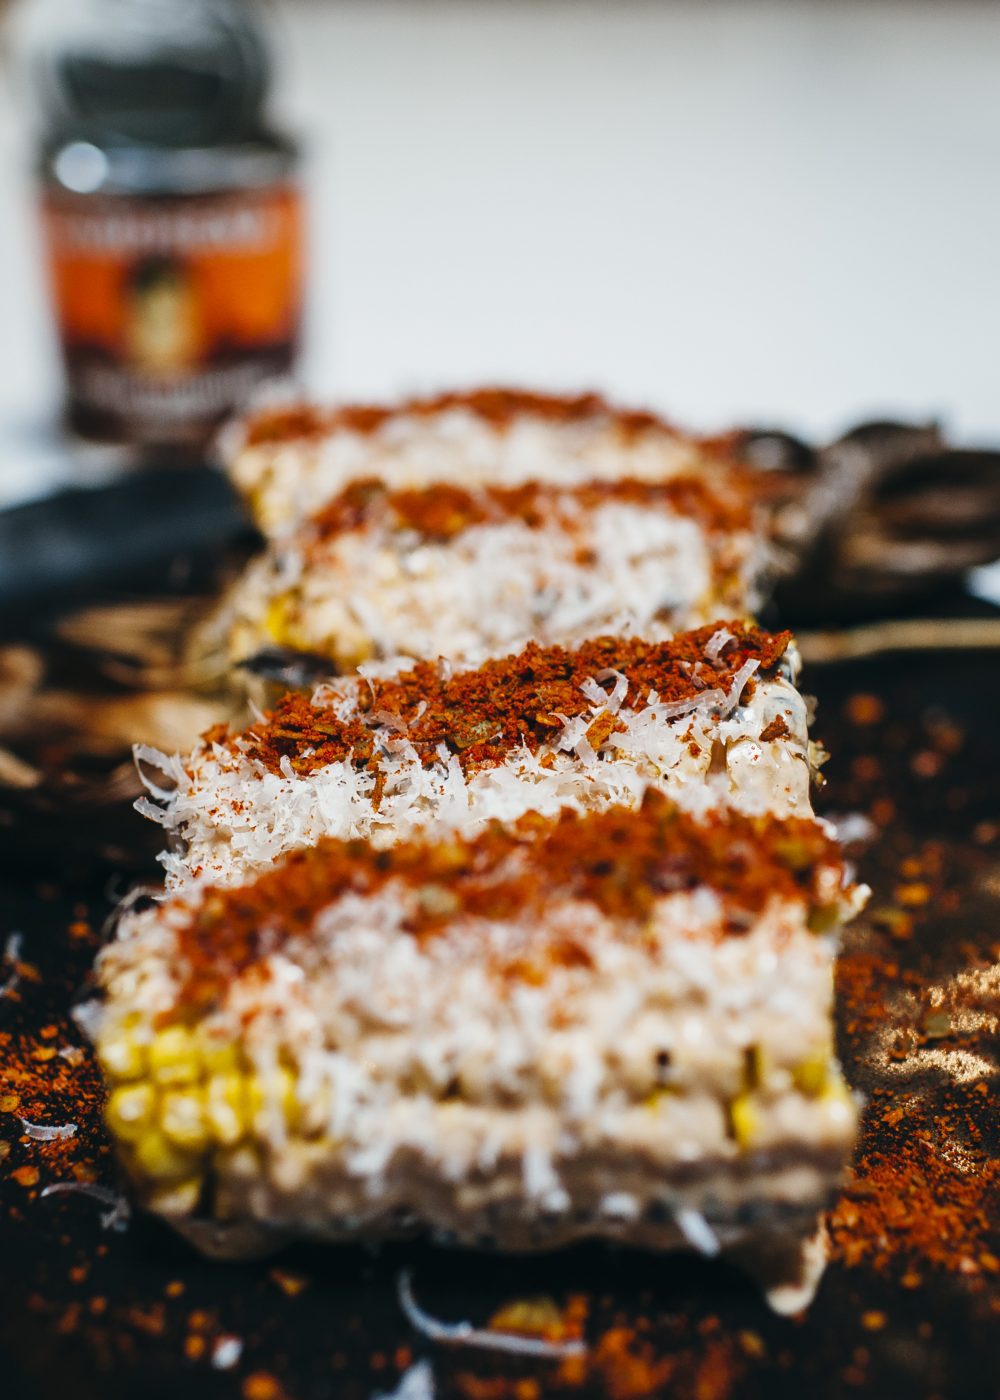 Mexican style Barbecue corn with chipotle mayonnaise and spice rub,Barbecue corn, Mexican style Barbecue corn with chipotle mayonnaise and spice rub